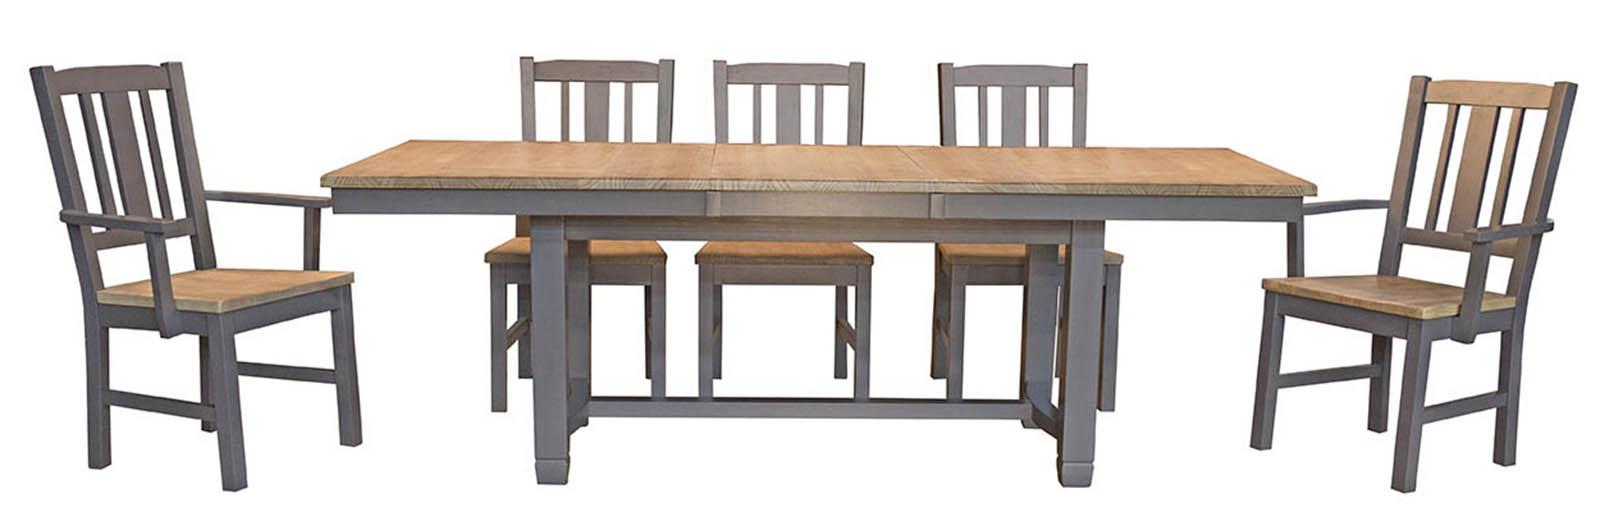 A-America Furniture Port Townsend Trestle Table in Seaside Pine